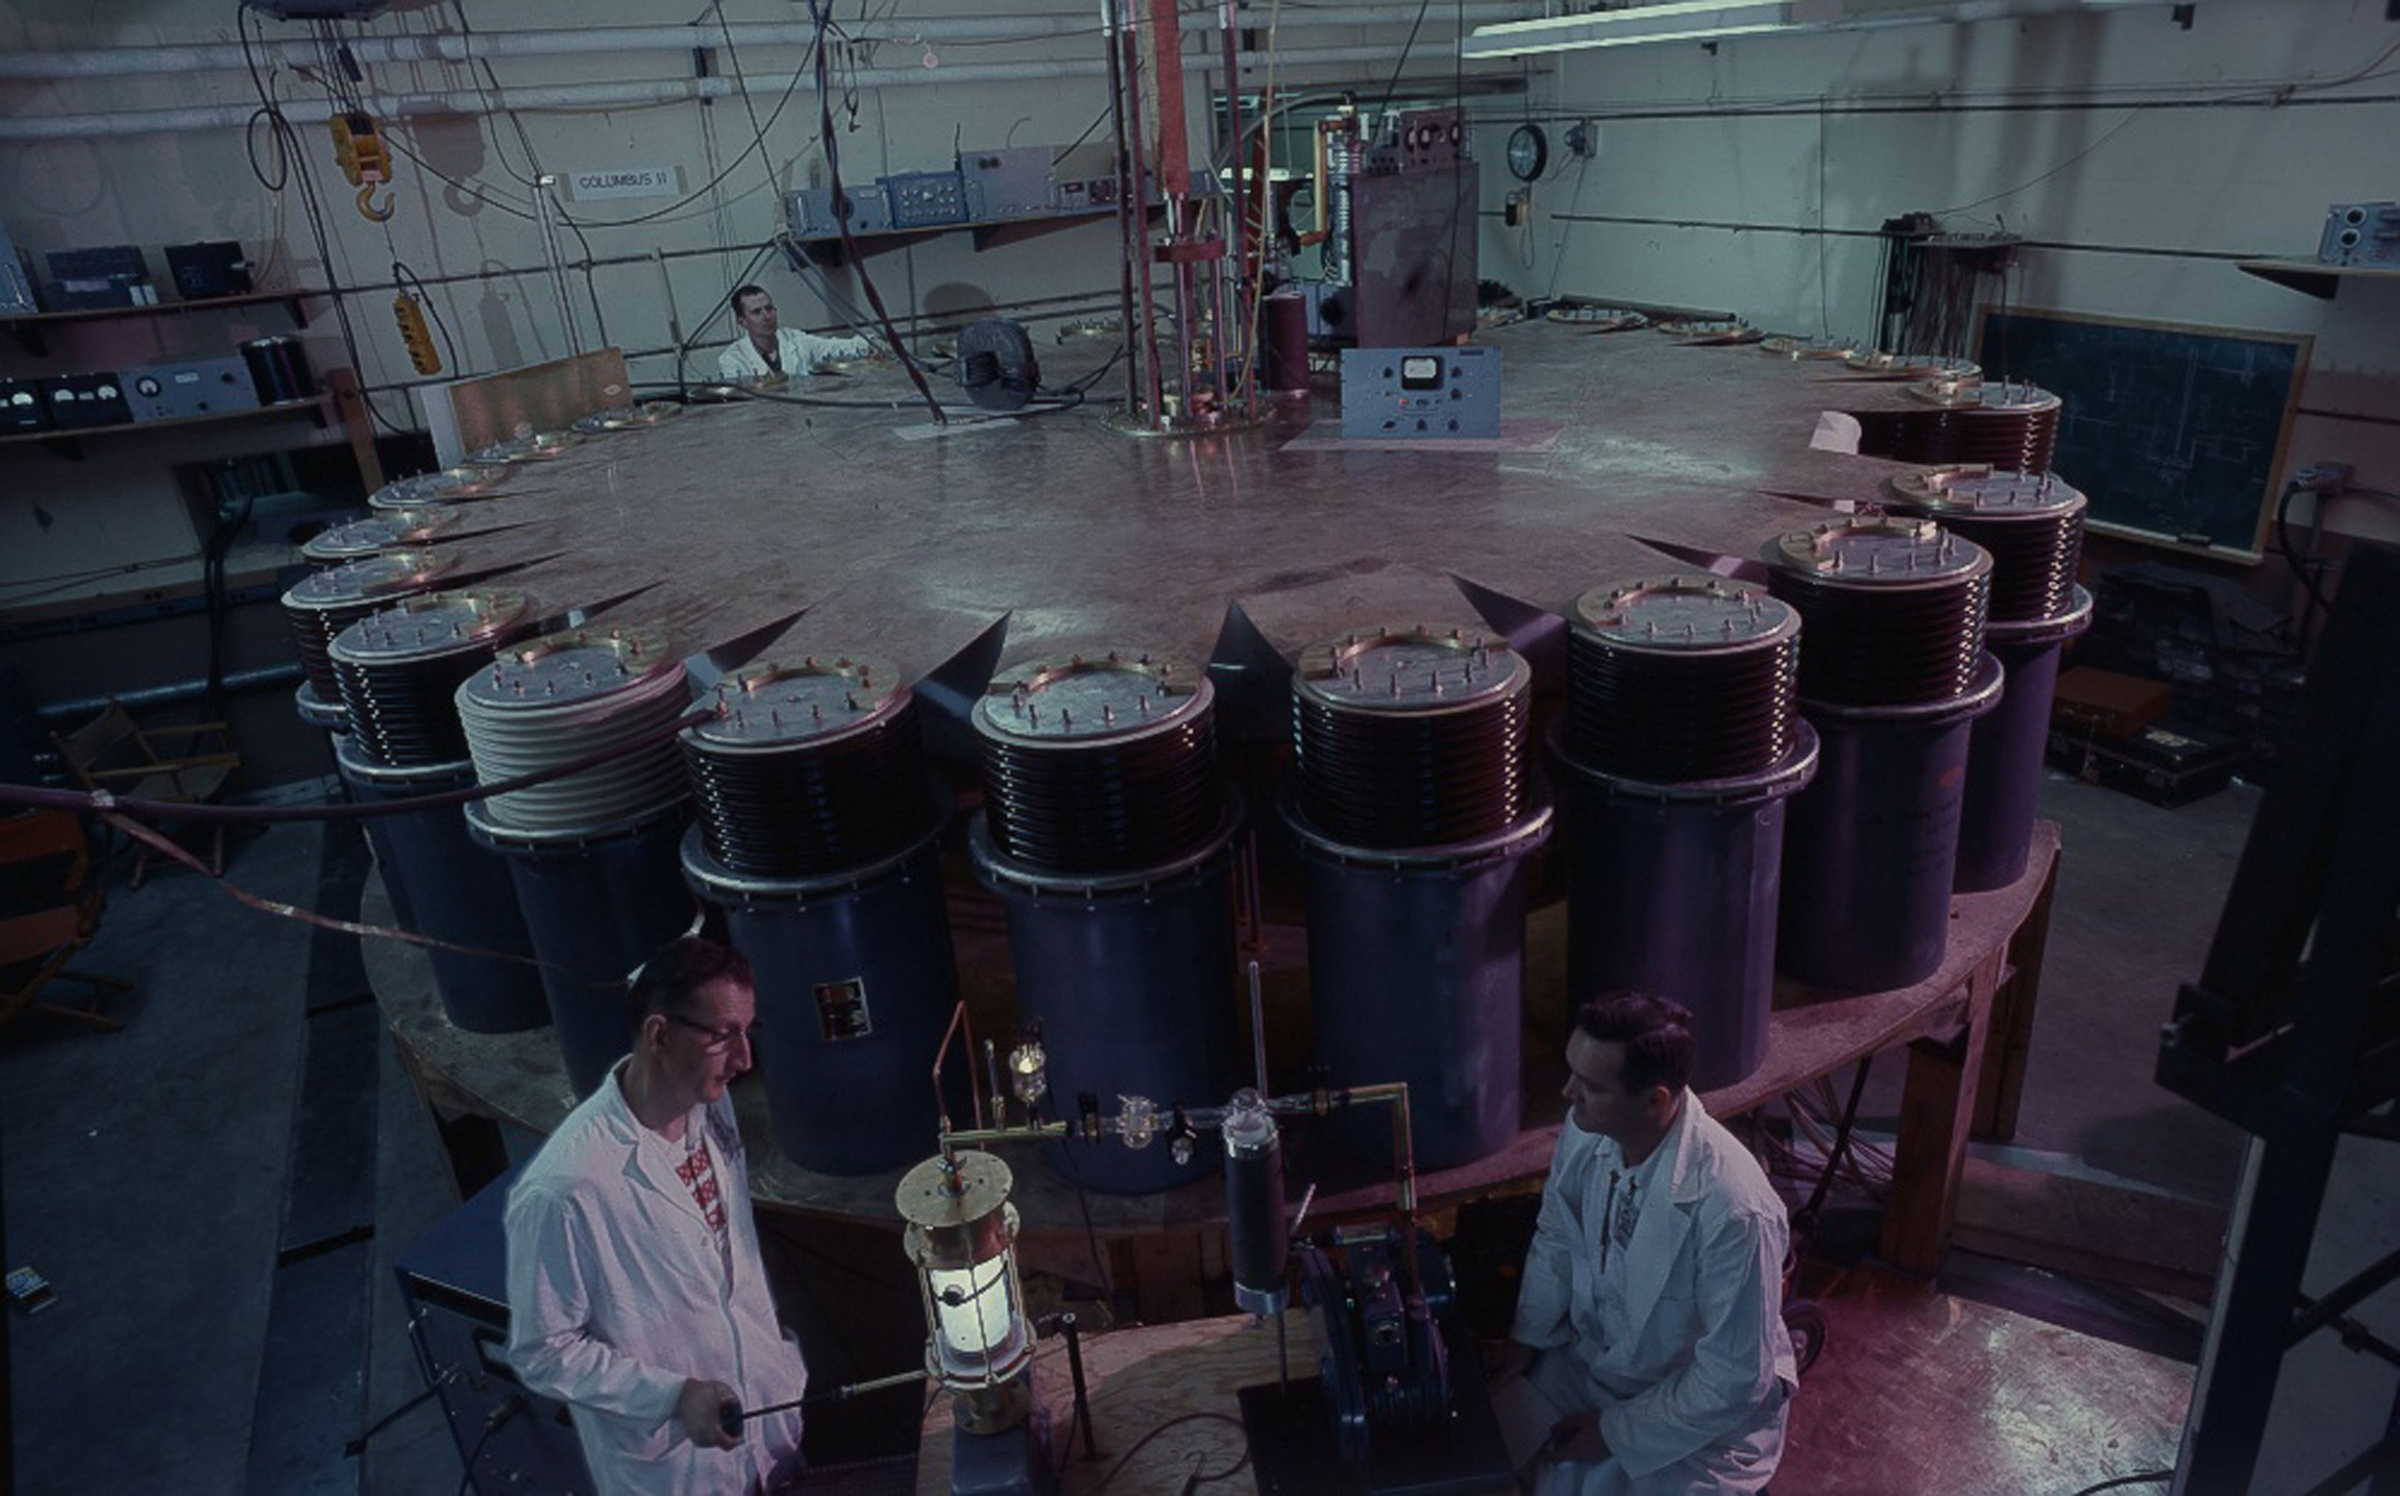 Laboratory personnel developing a fusion device in Project Sherwood at the Los Alamos National Laboratory, 1958 (J. R. Eyerman—The LIFE Picture Collection/Shutterstock)